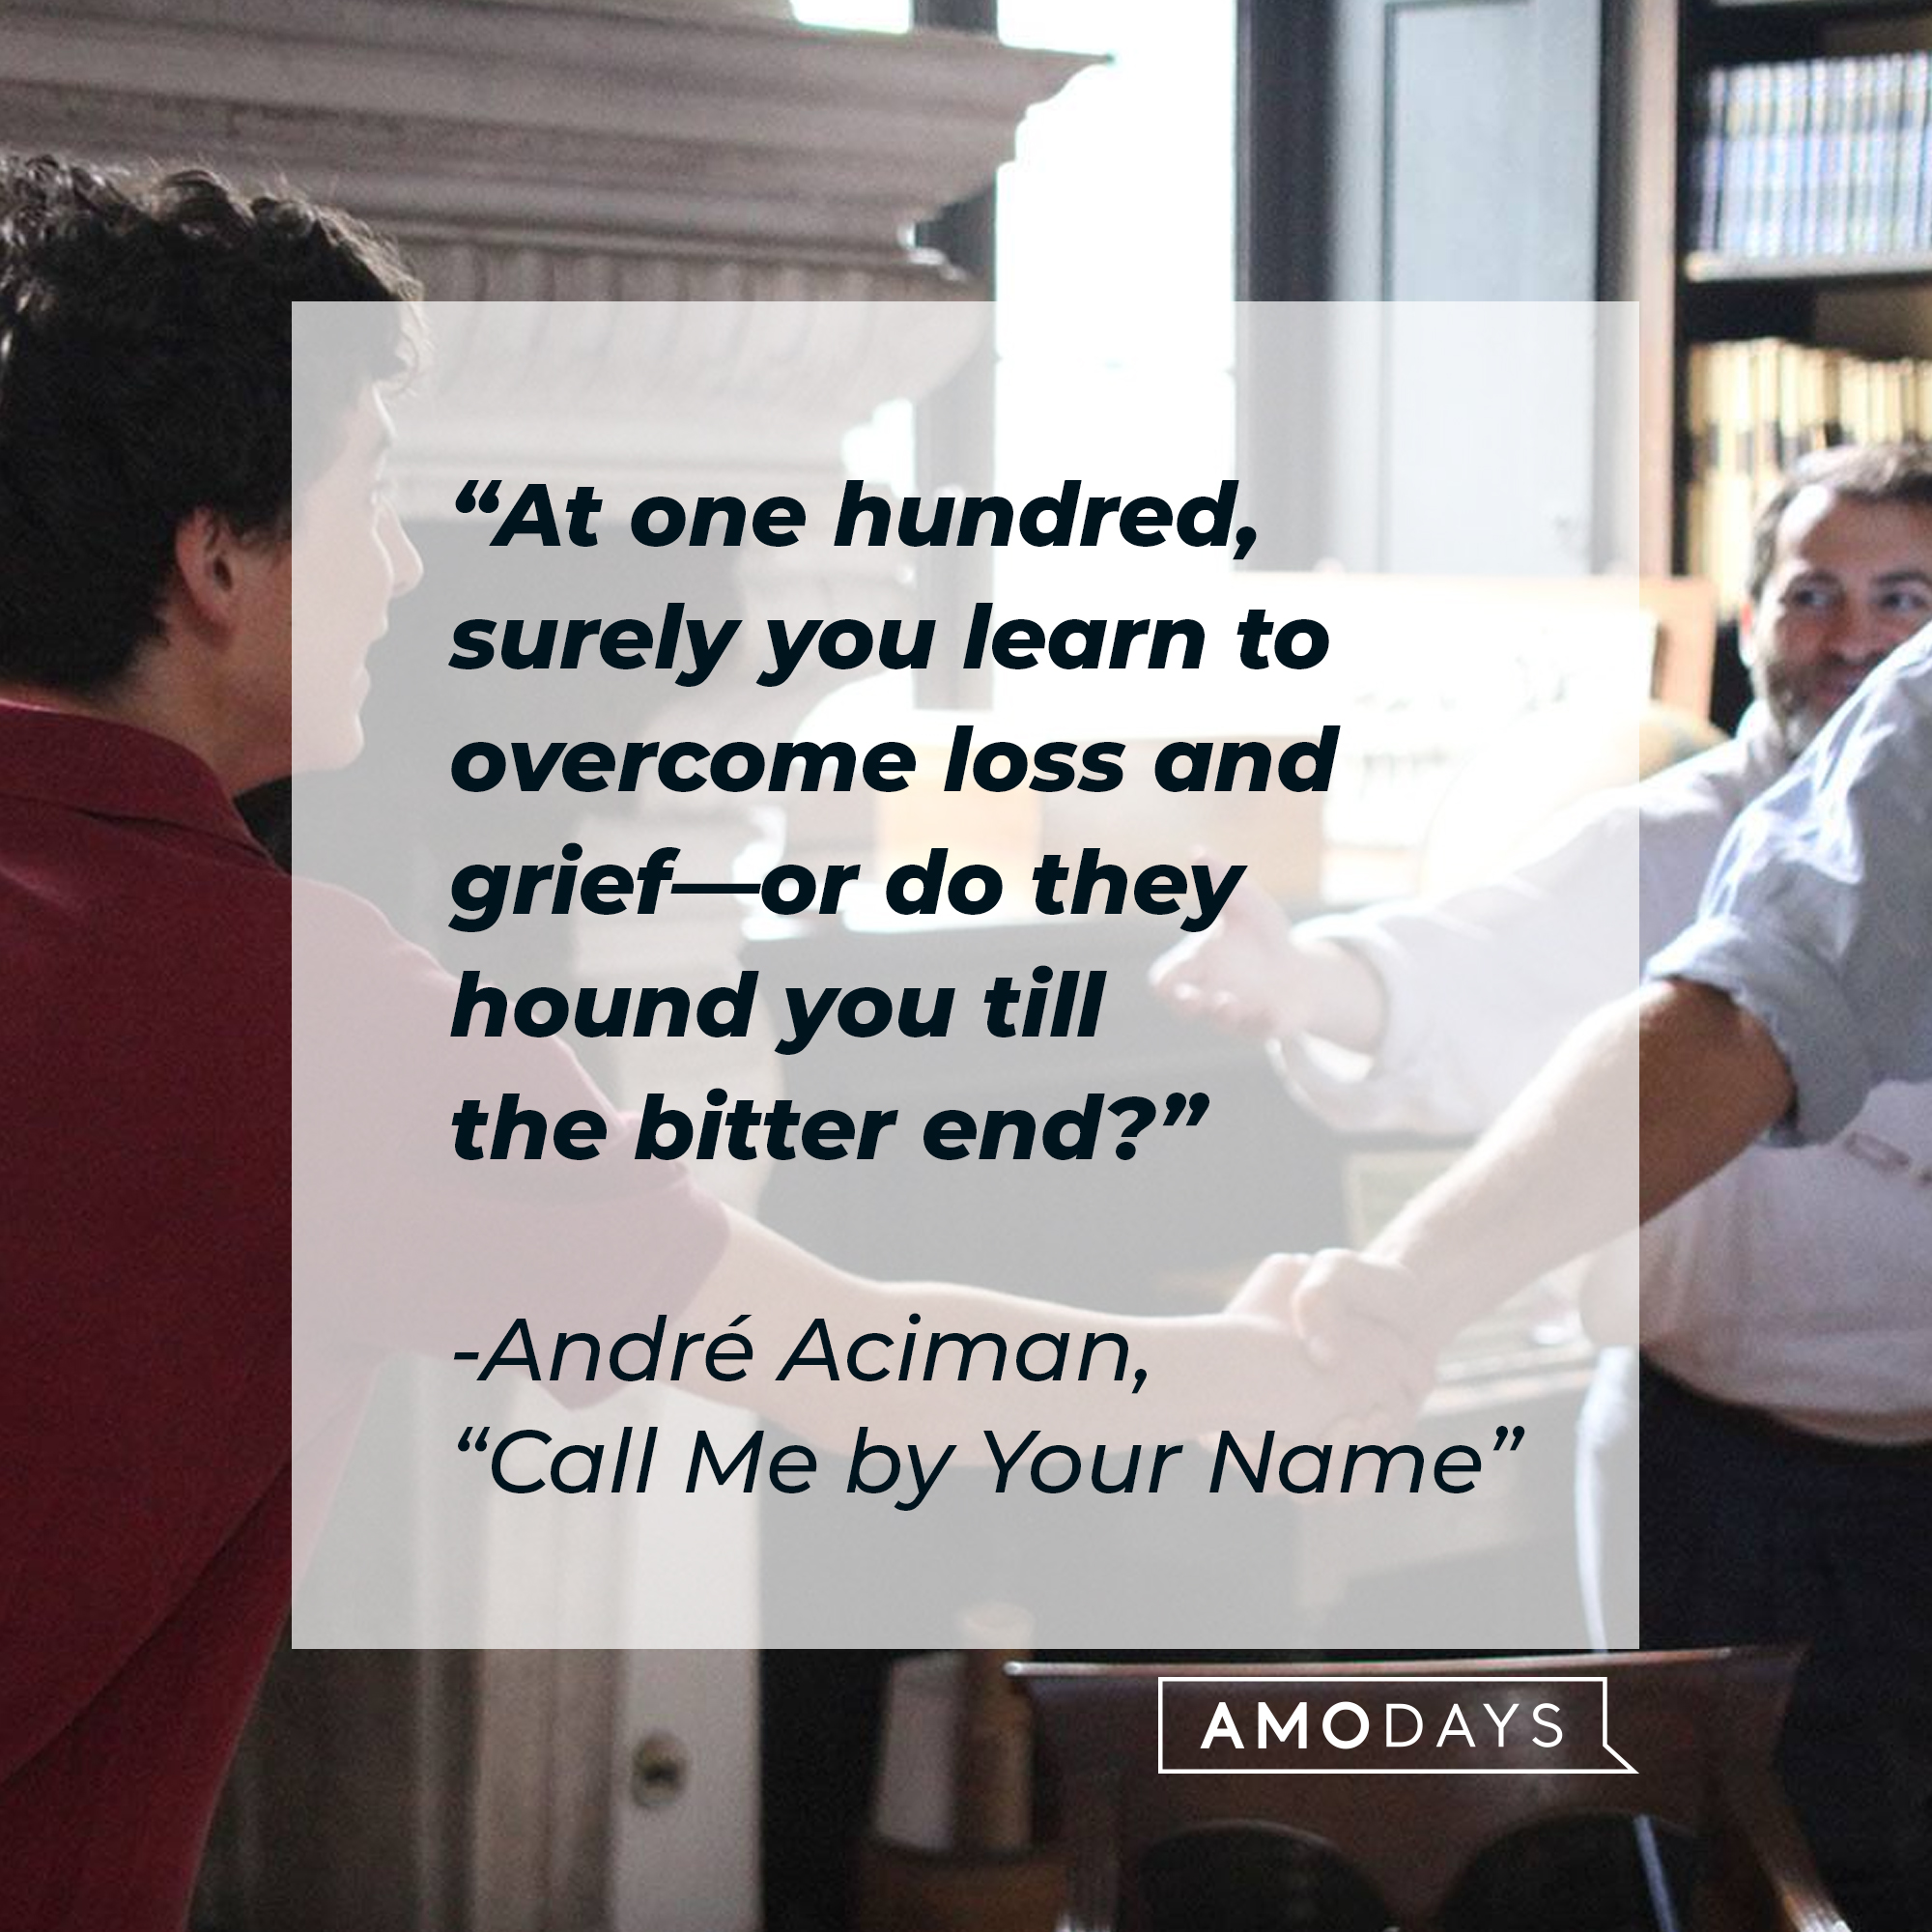 The character Elio from the film “Call Me By Your Name,” with a quote by the author, André Aciman, from the book it’s based on: "At one hundred, surely you learn to overcome loss and grief—or do they hound you till the bitter end?" | Source: Facebook.com/CallMeByYourNameFilm